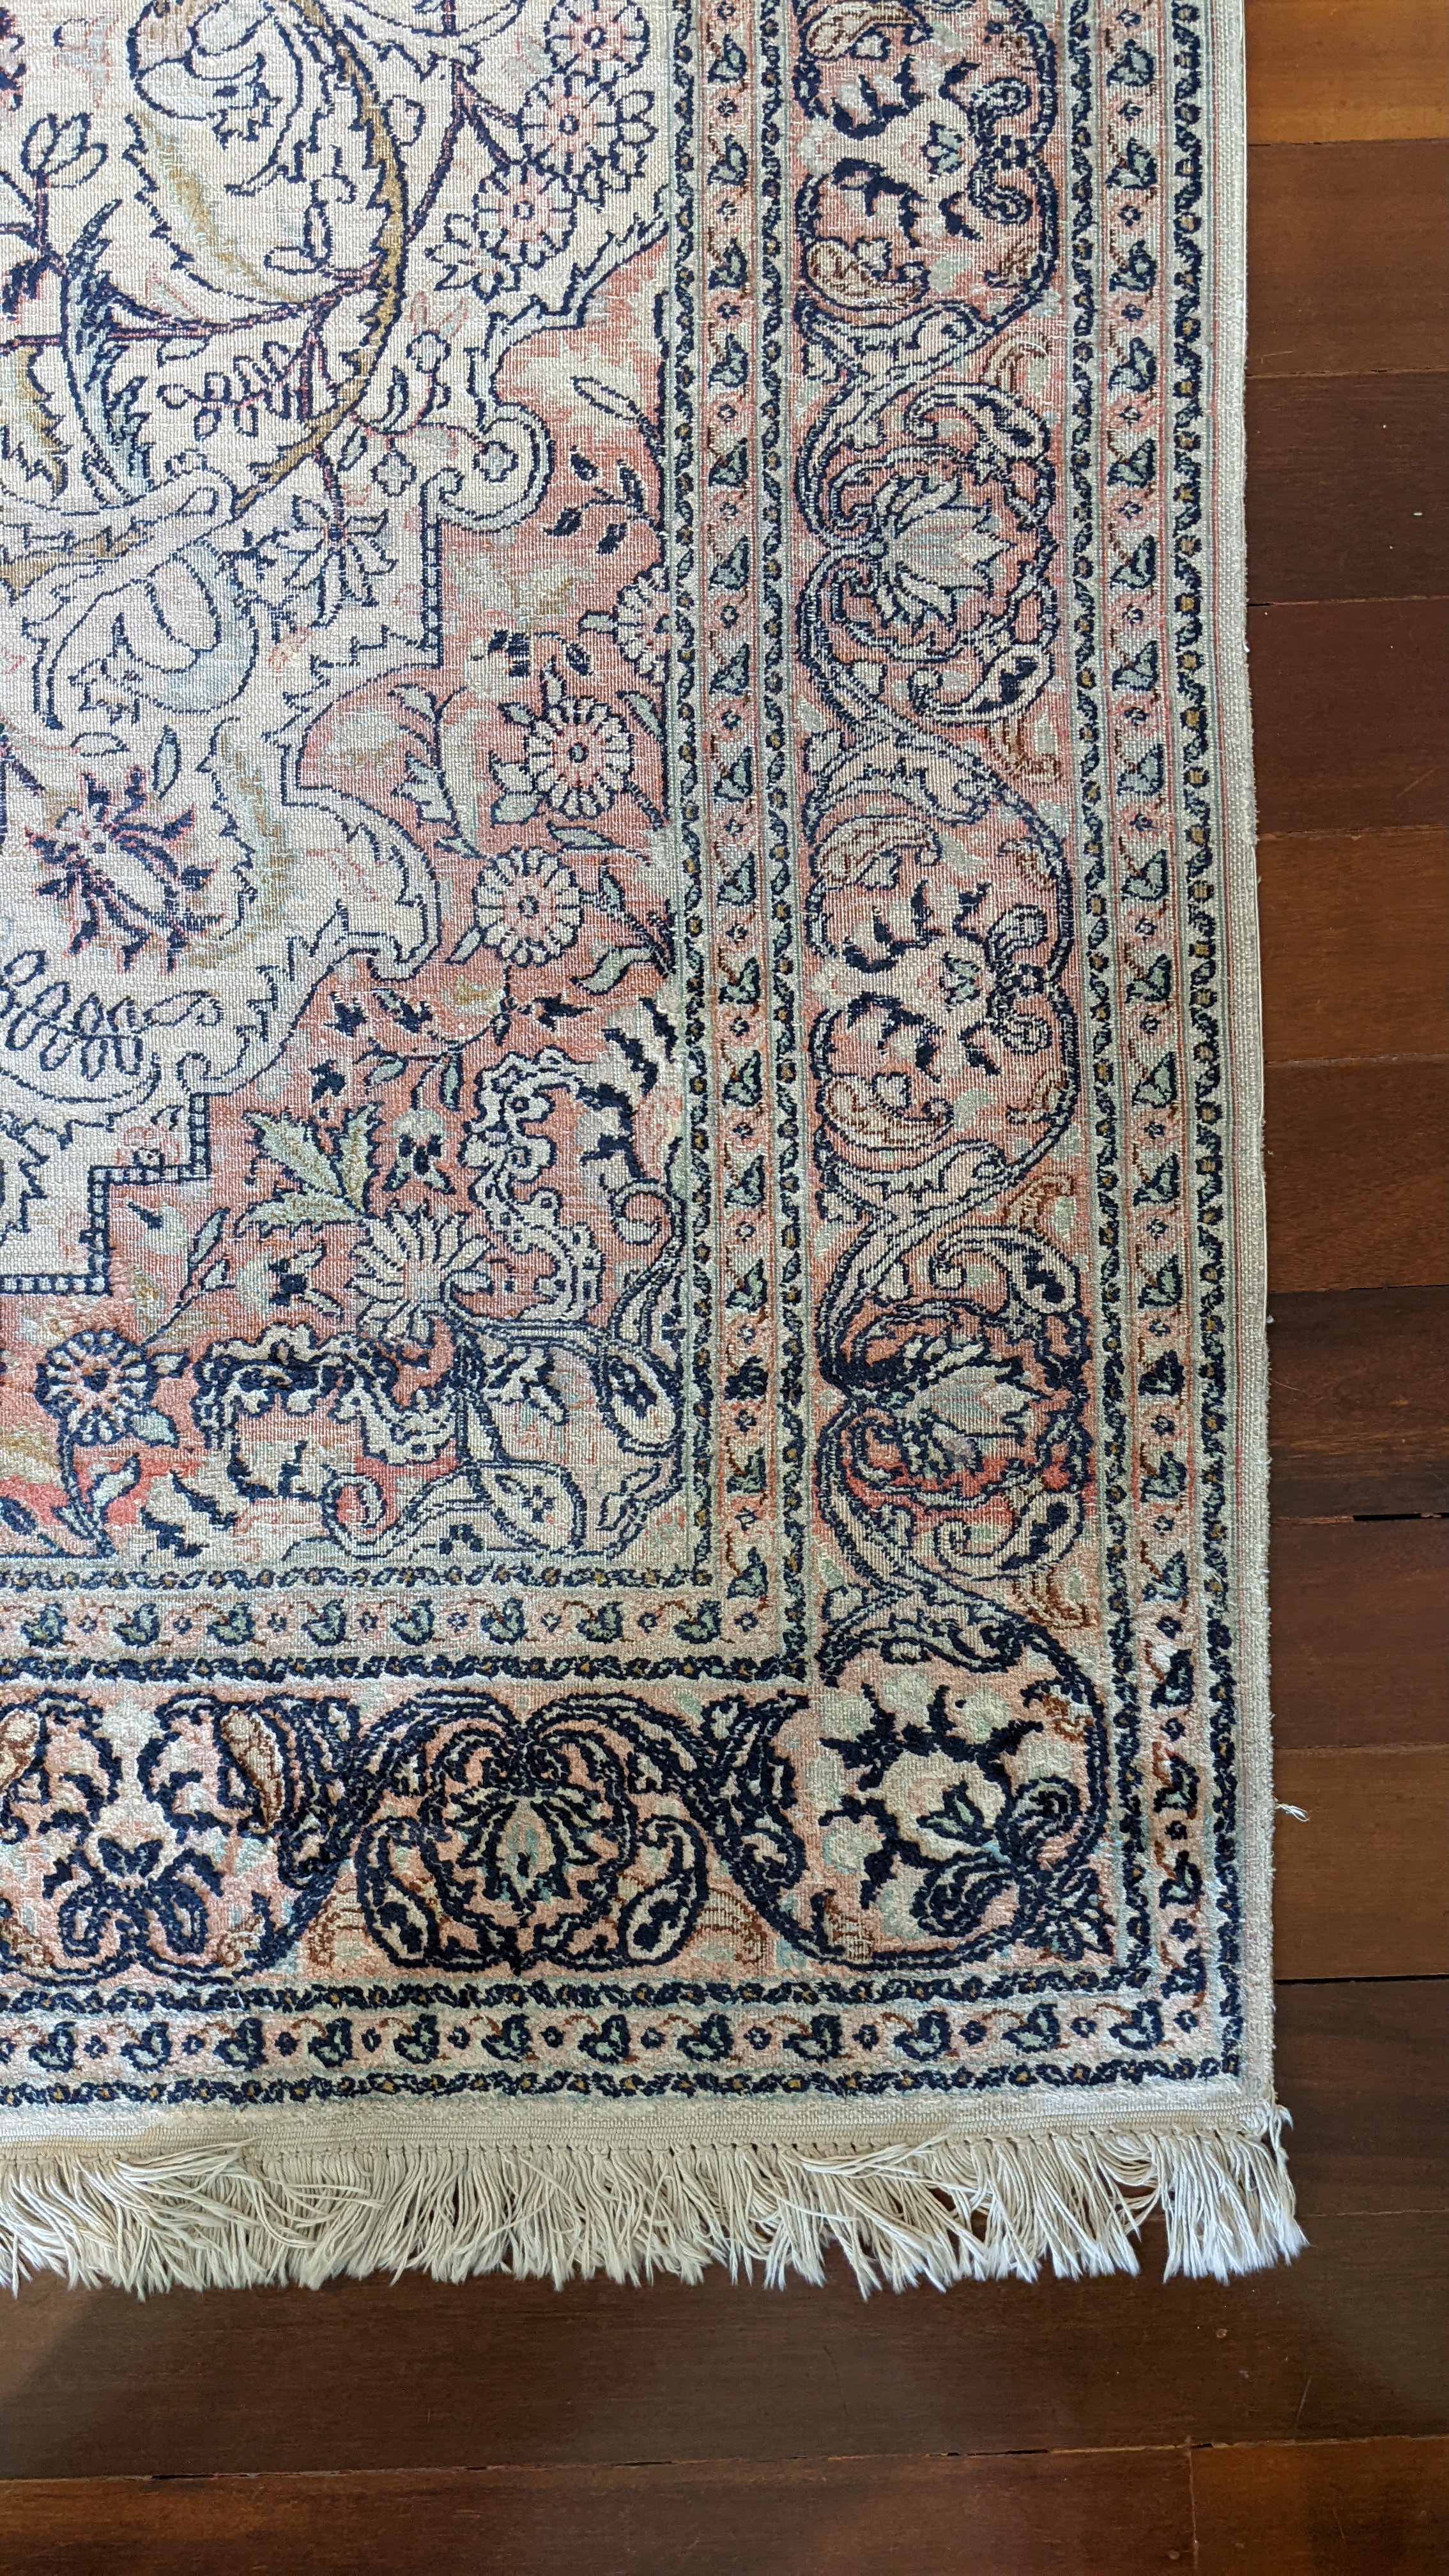 A PERSIAN DESIGN RUG - Image 3 of 3